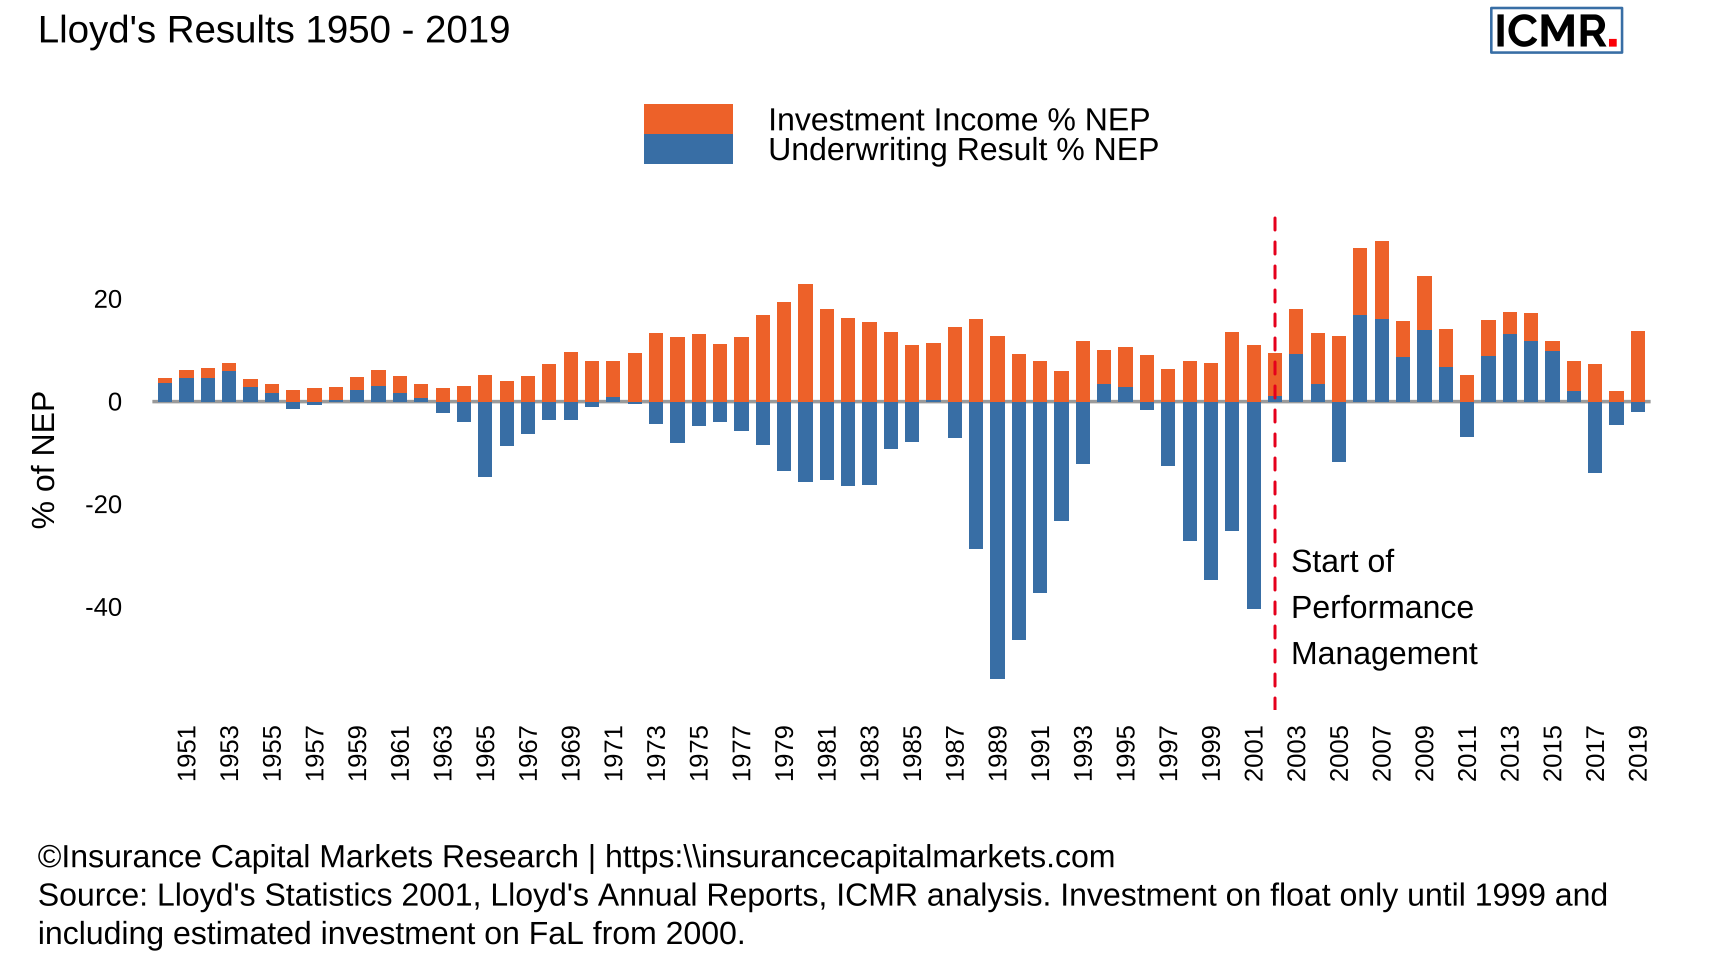 Lloyd's underwriting and investment results as a ratio of net earned premium (NEP) from 1950 - 2019